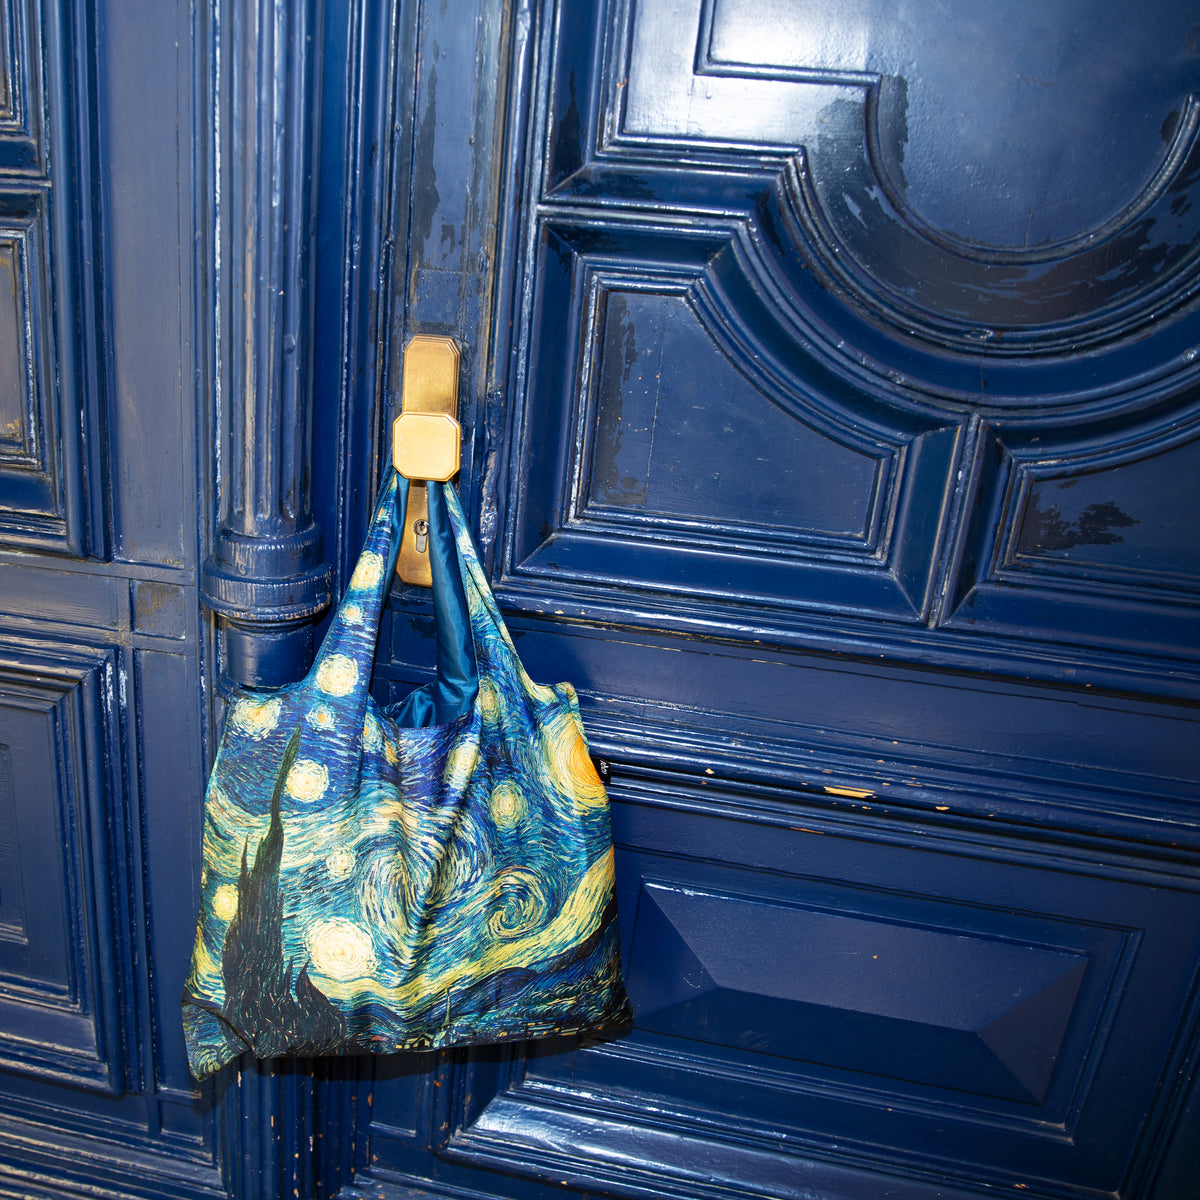 The Starry Night Recycled Tote Bag – Hyperallergic Store